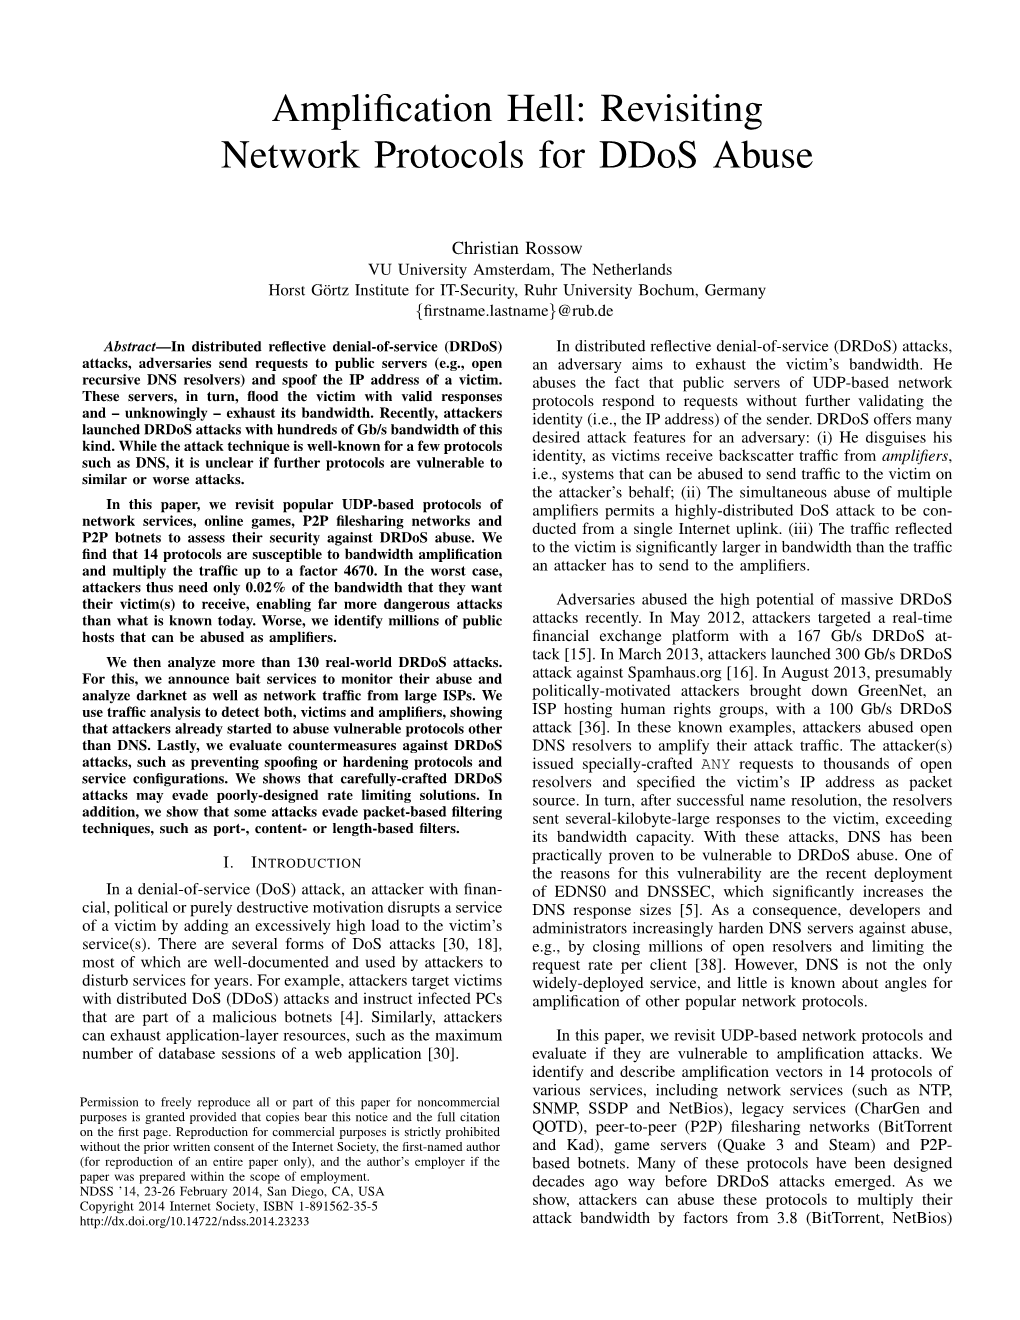 Amplification Hell: Revisiting Network Protocols for Ddos Abuse